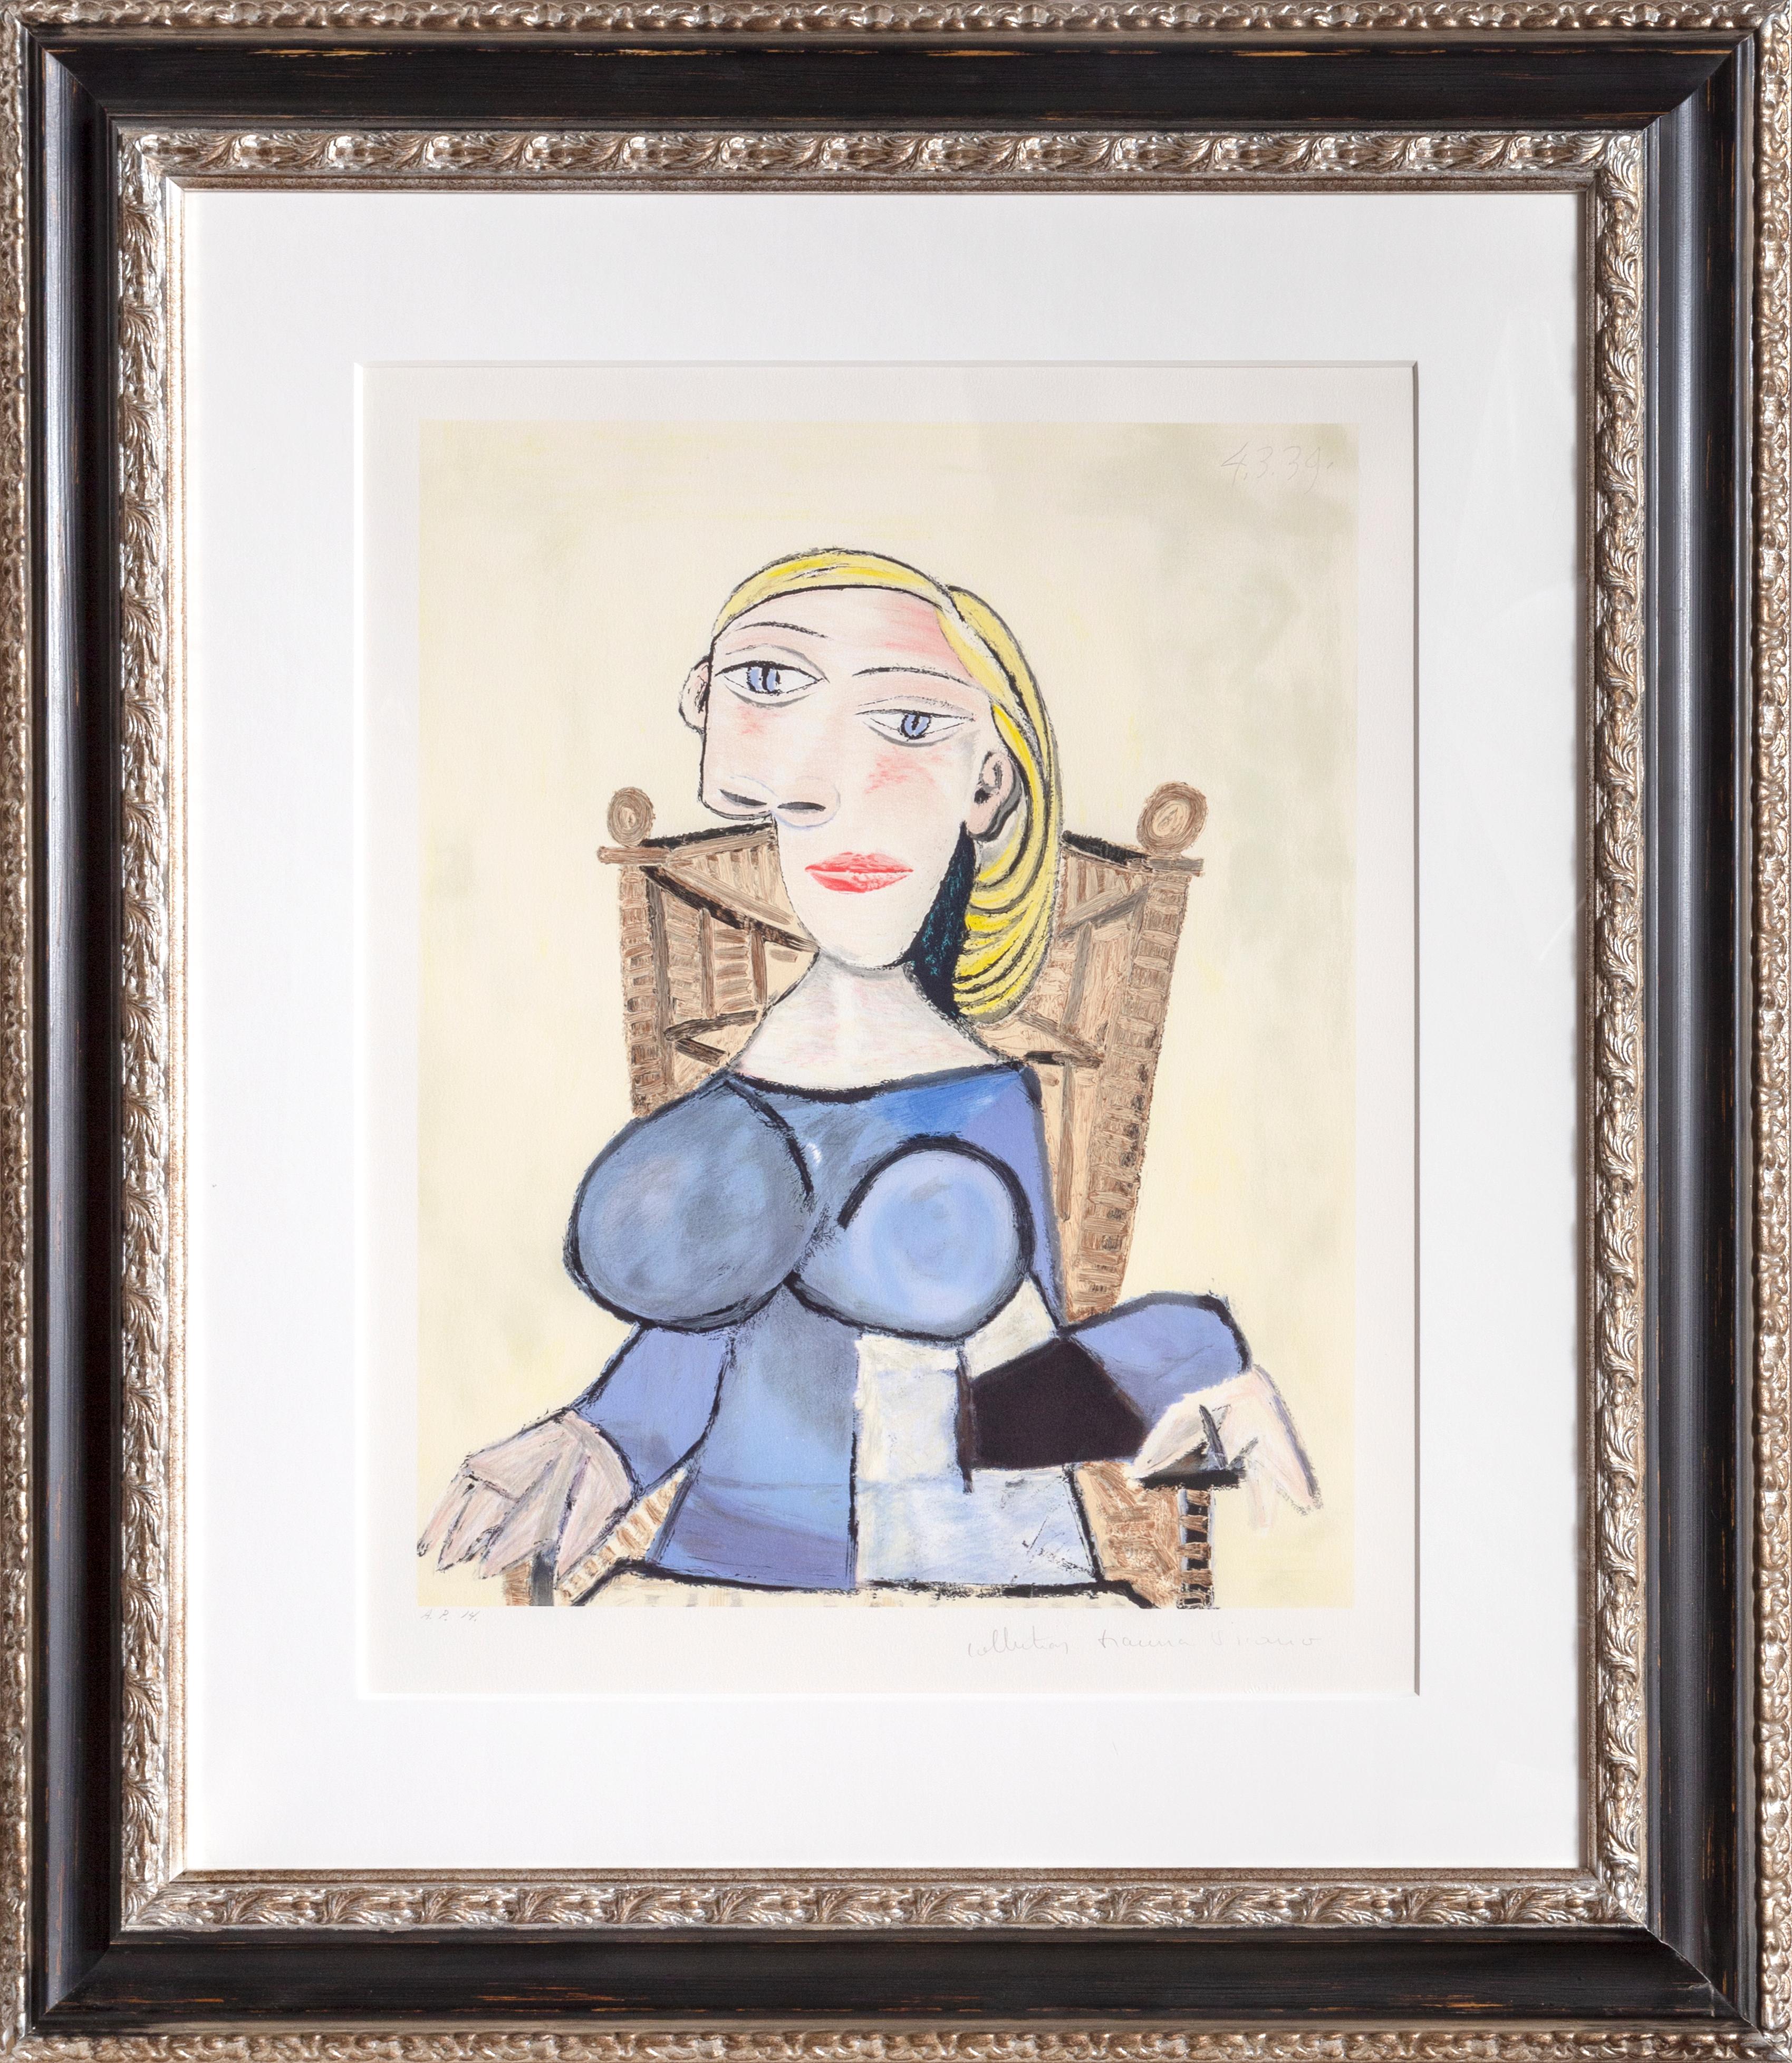 A lithograph from the Marina Picasso Estate Collection after the Pablo Picasso painting "Femme Blonde Au Fauteuil D'Osier".  The original painting was completed in 1939. In the 1970's after Picasso's death, Marina Picasso, his granddaughter,